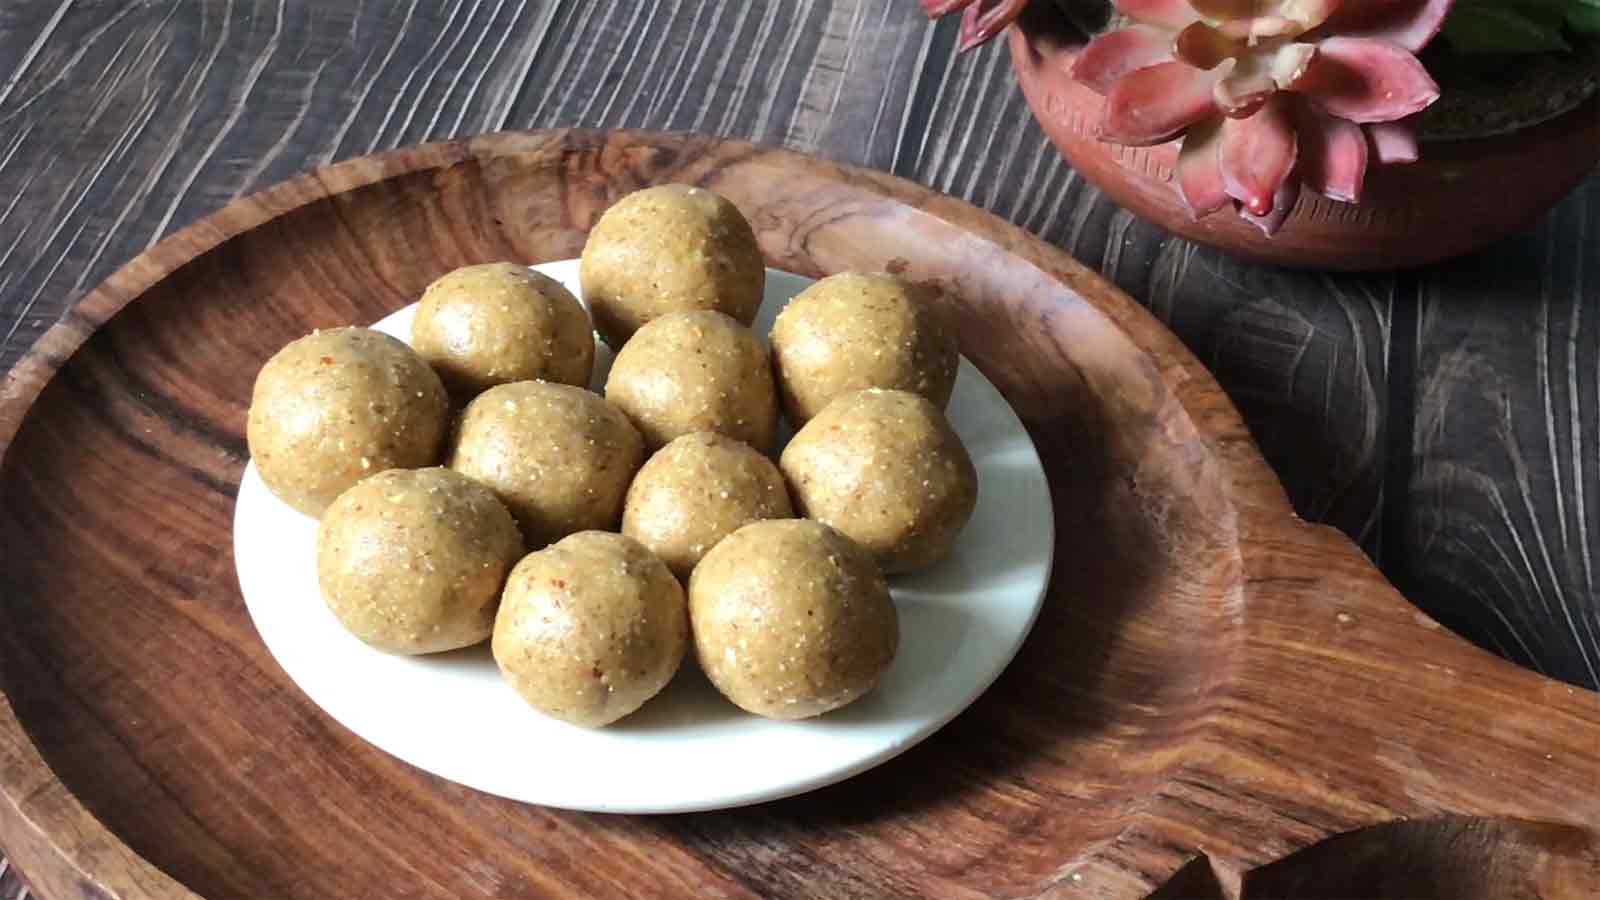 Is ladoo good for weight loss?